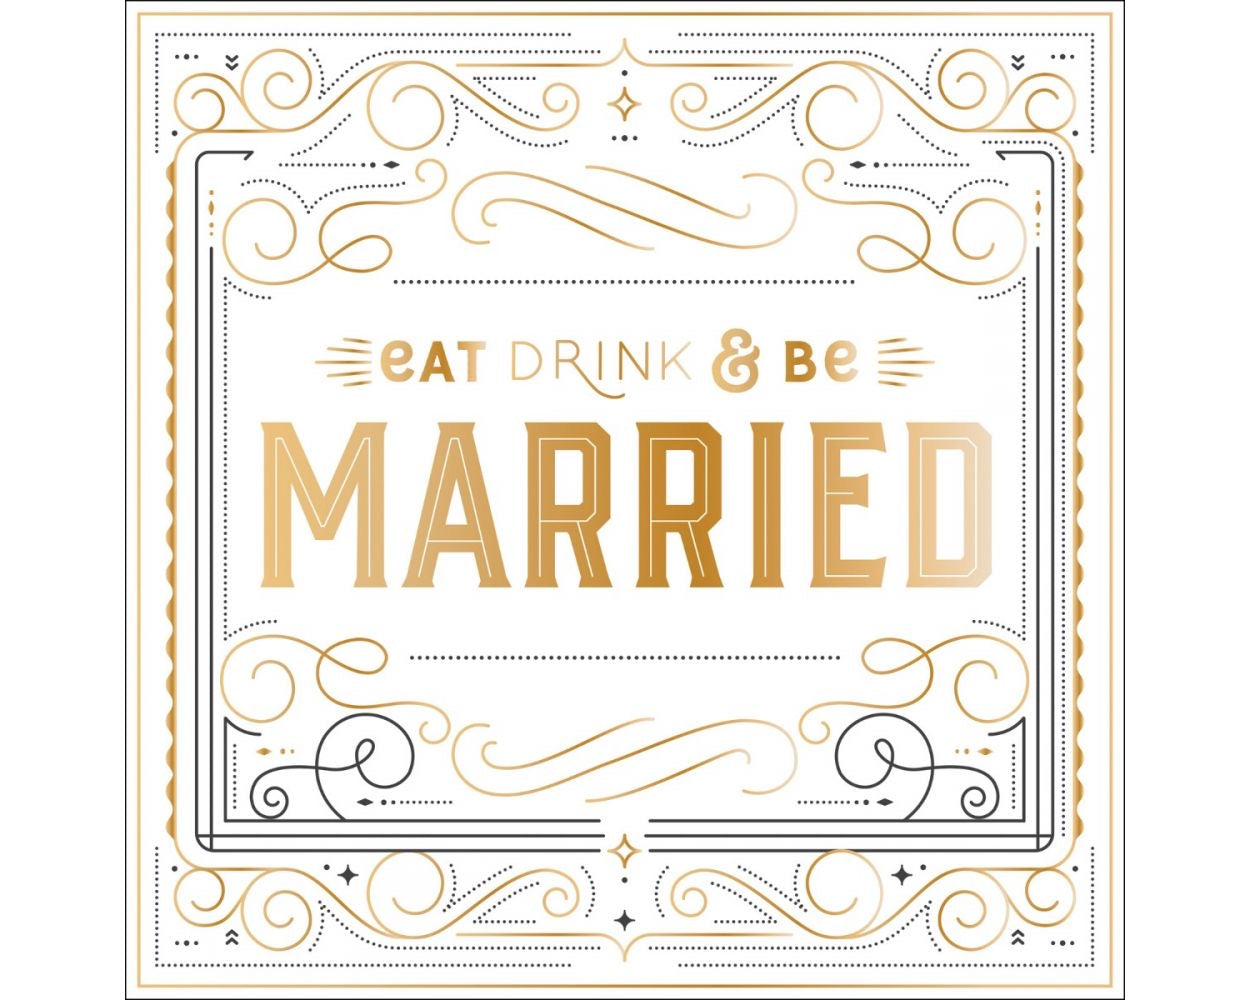 Eat drink and be Married Prompted Guest Book